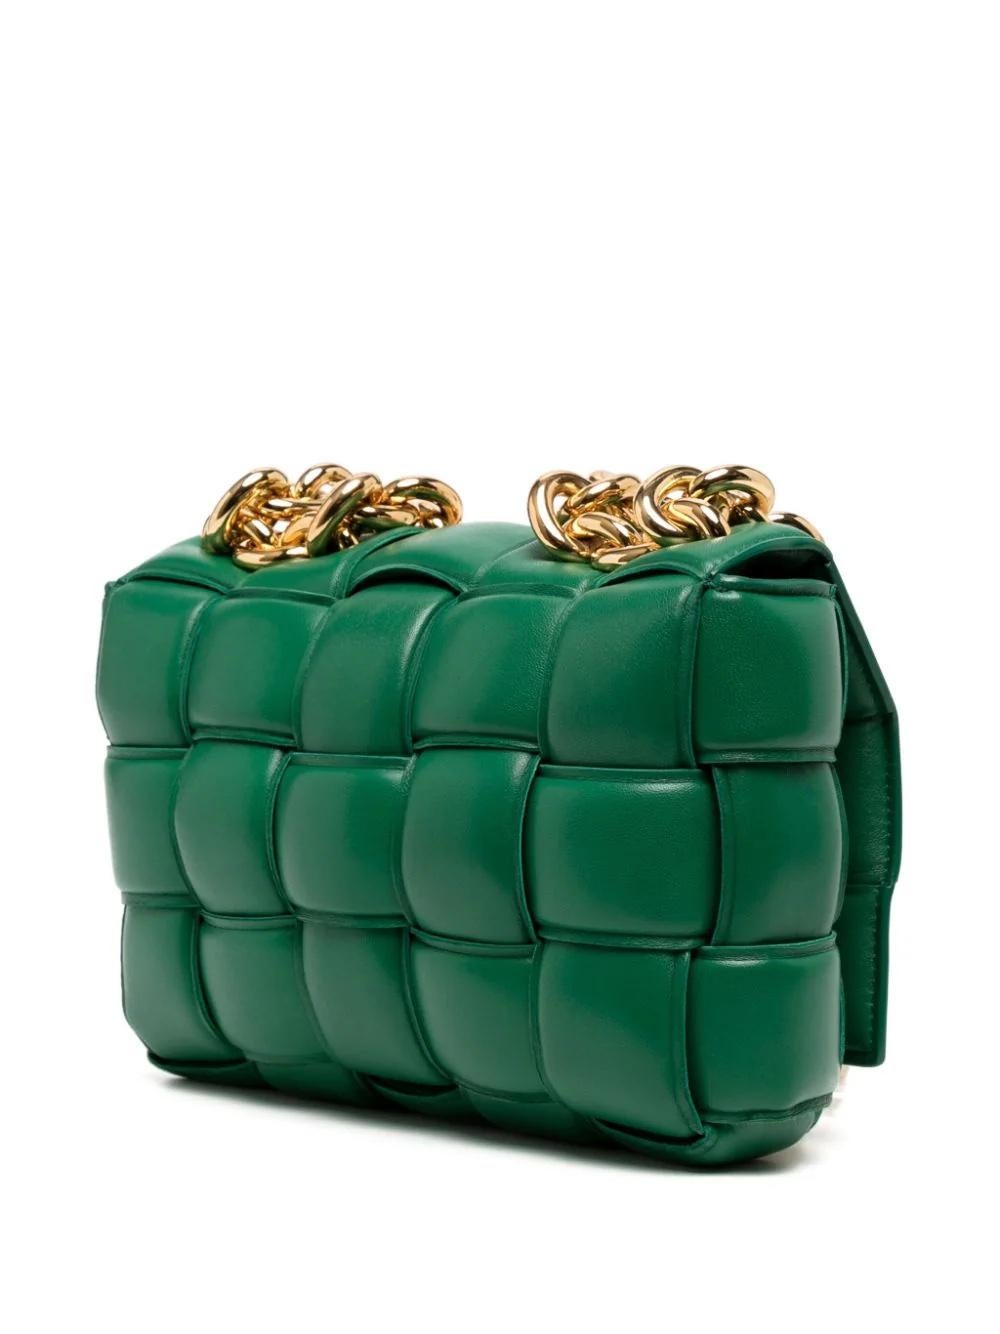 * Emerald green
* Leather
* Signature Maxi Intrecciato design
* Single chain-link top handle
* Chain-link shoulder strap
* Fold-over top
* Gold-tone hardware
* Excellent Condition: No major signs of wear. Comes with a dustbag.

Please note that most